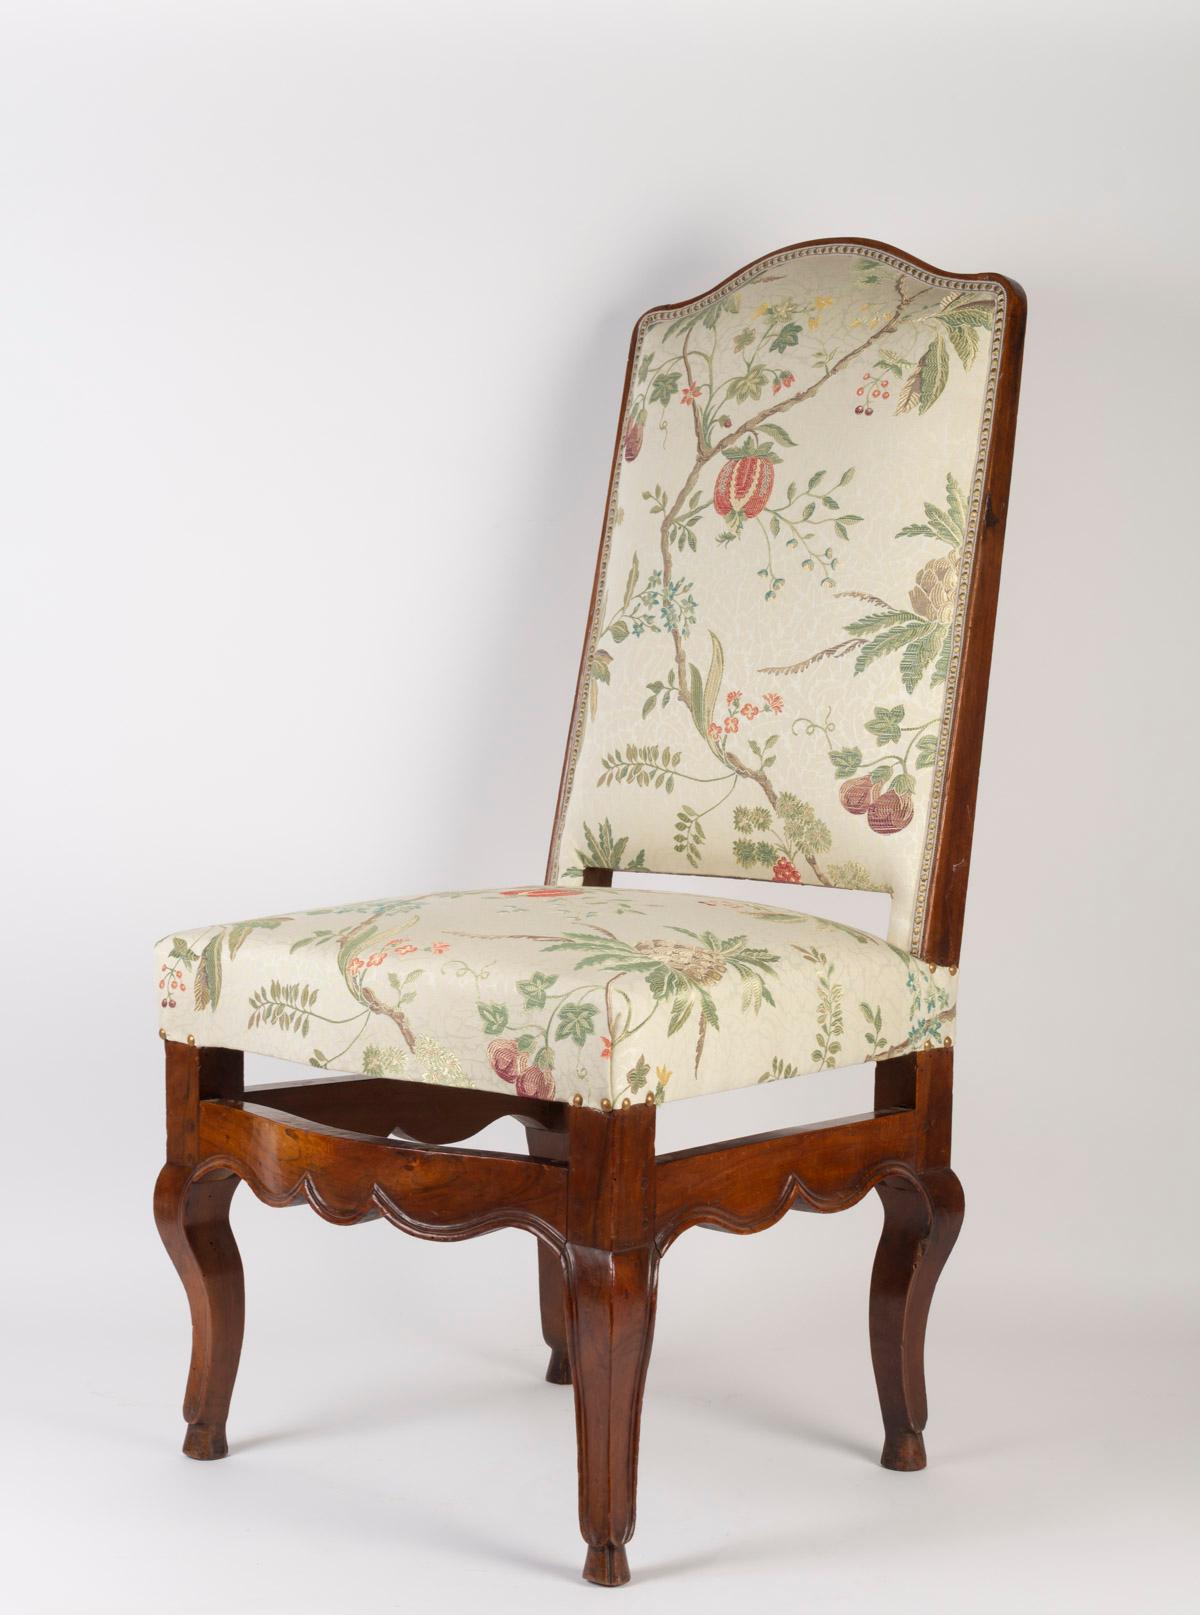 Tapestry Pair of Walnut Provençal Chairs, 18th Century Period